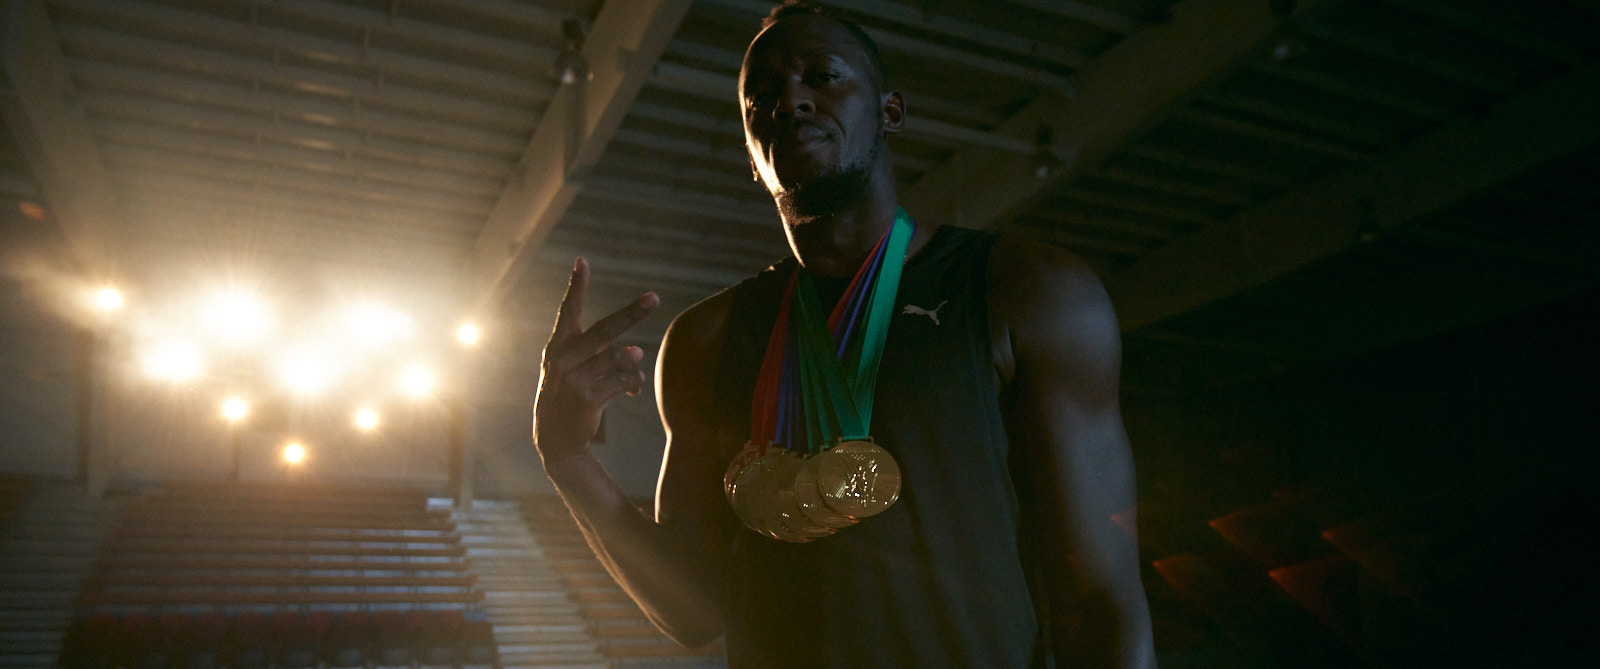 Usain Bolt with gold medals